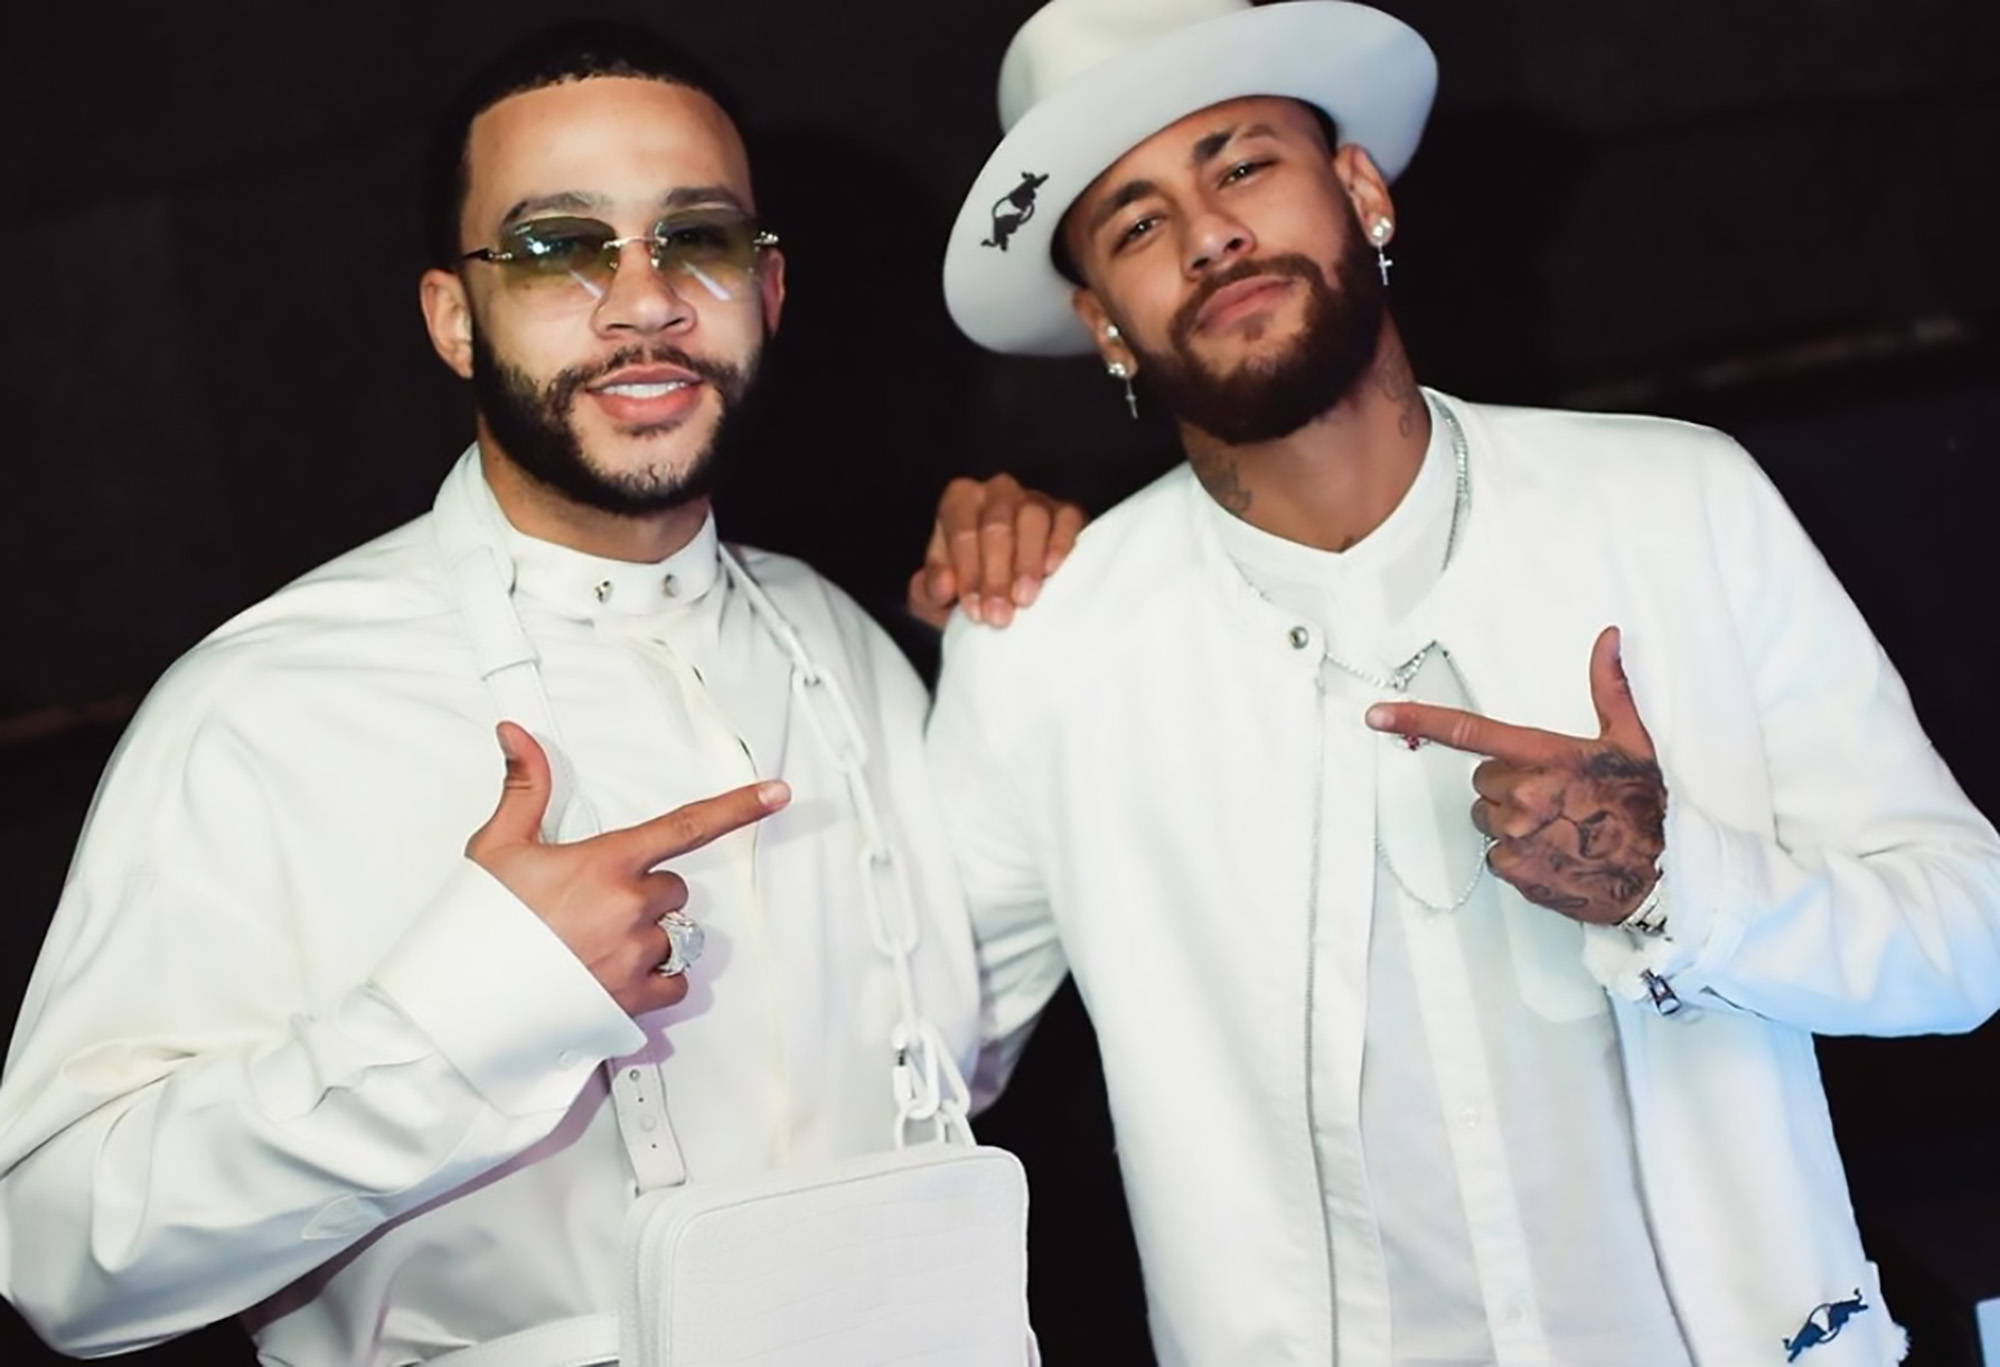 Neymar has revealed pictures from his all-white birthday bash